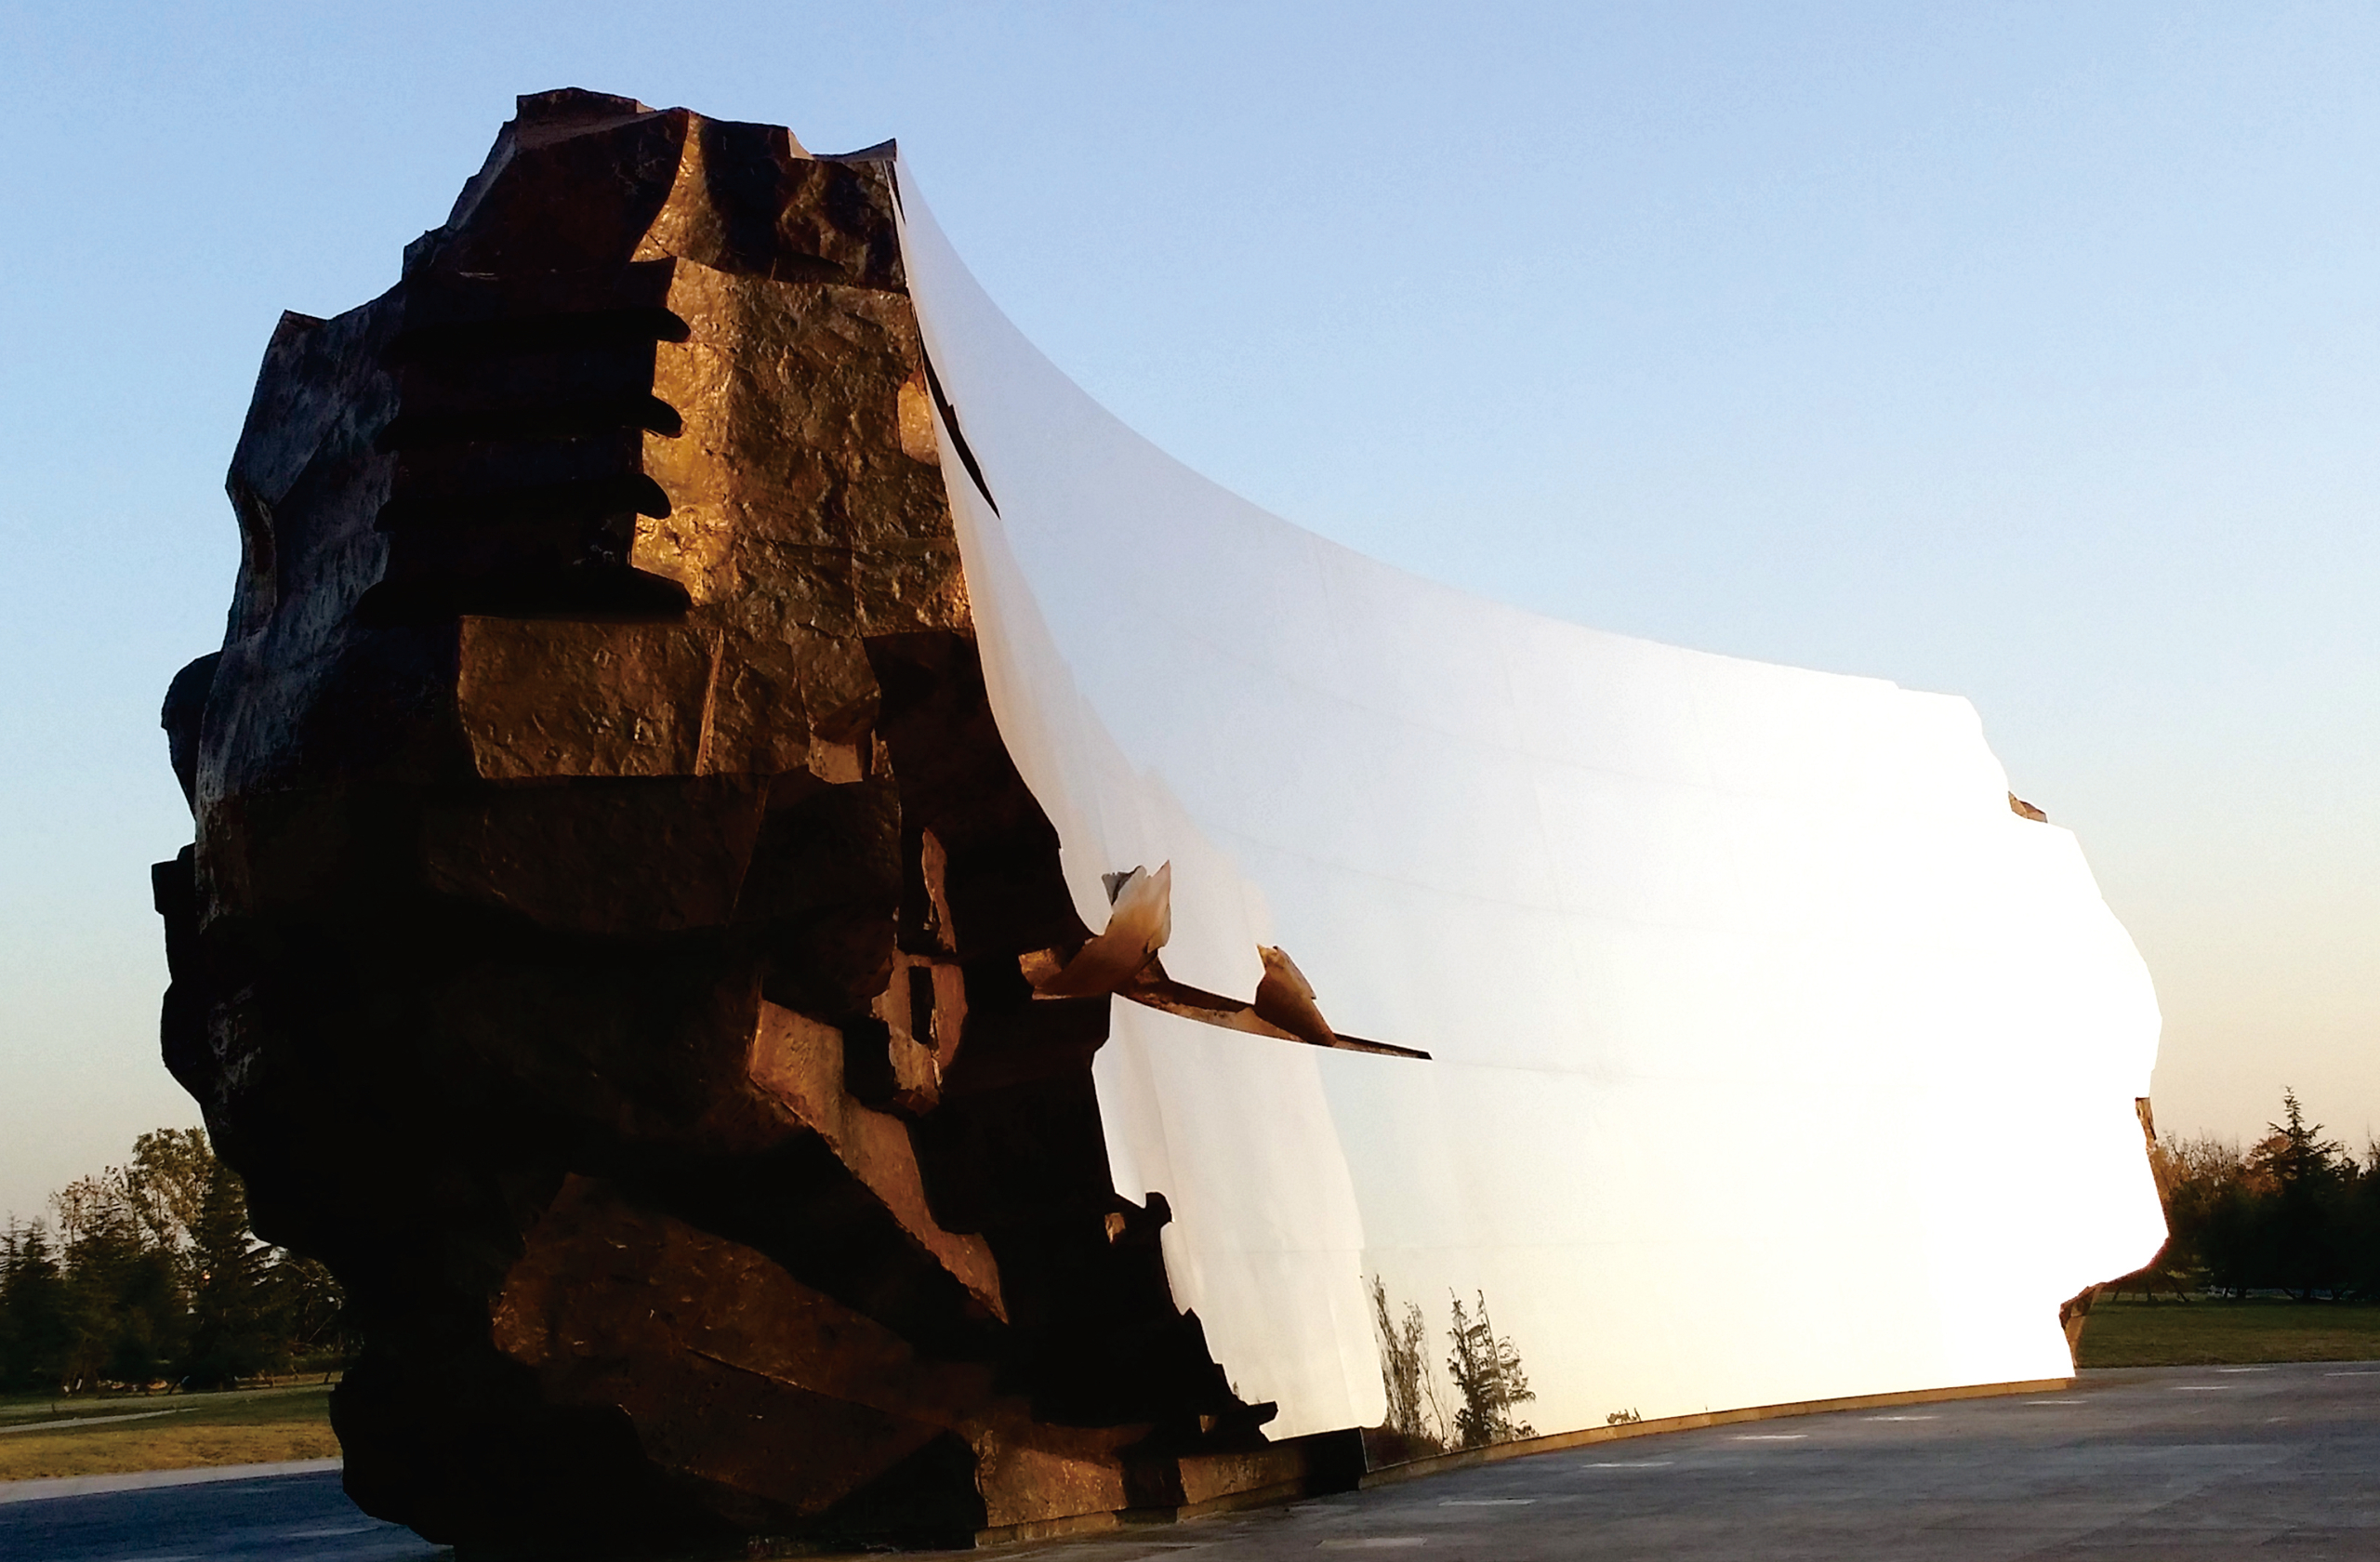 Curved mirror stainless steel facade-Invisible Realm